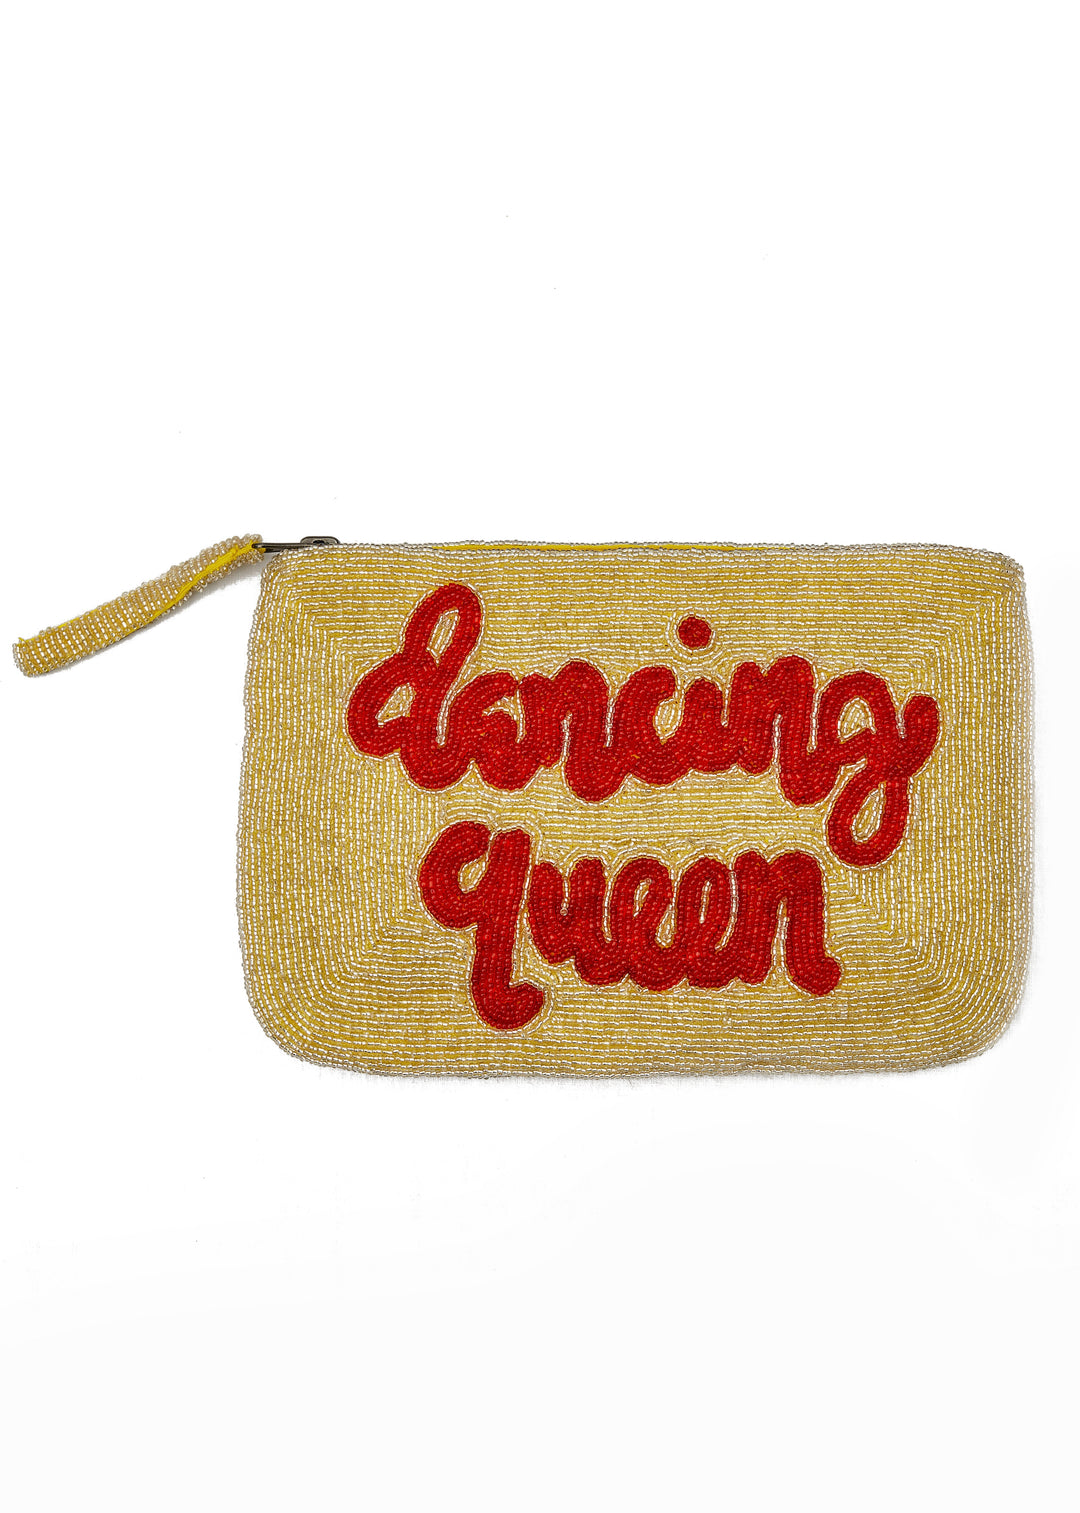 The Jacksons | Dancing Queen Gold and Red Handmade Beaded Clutch